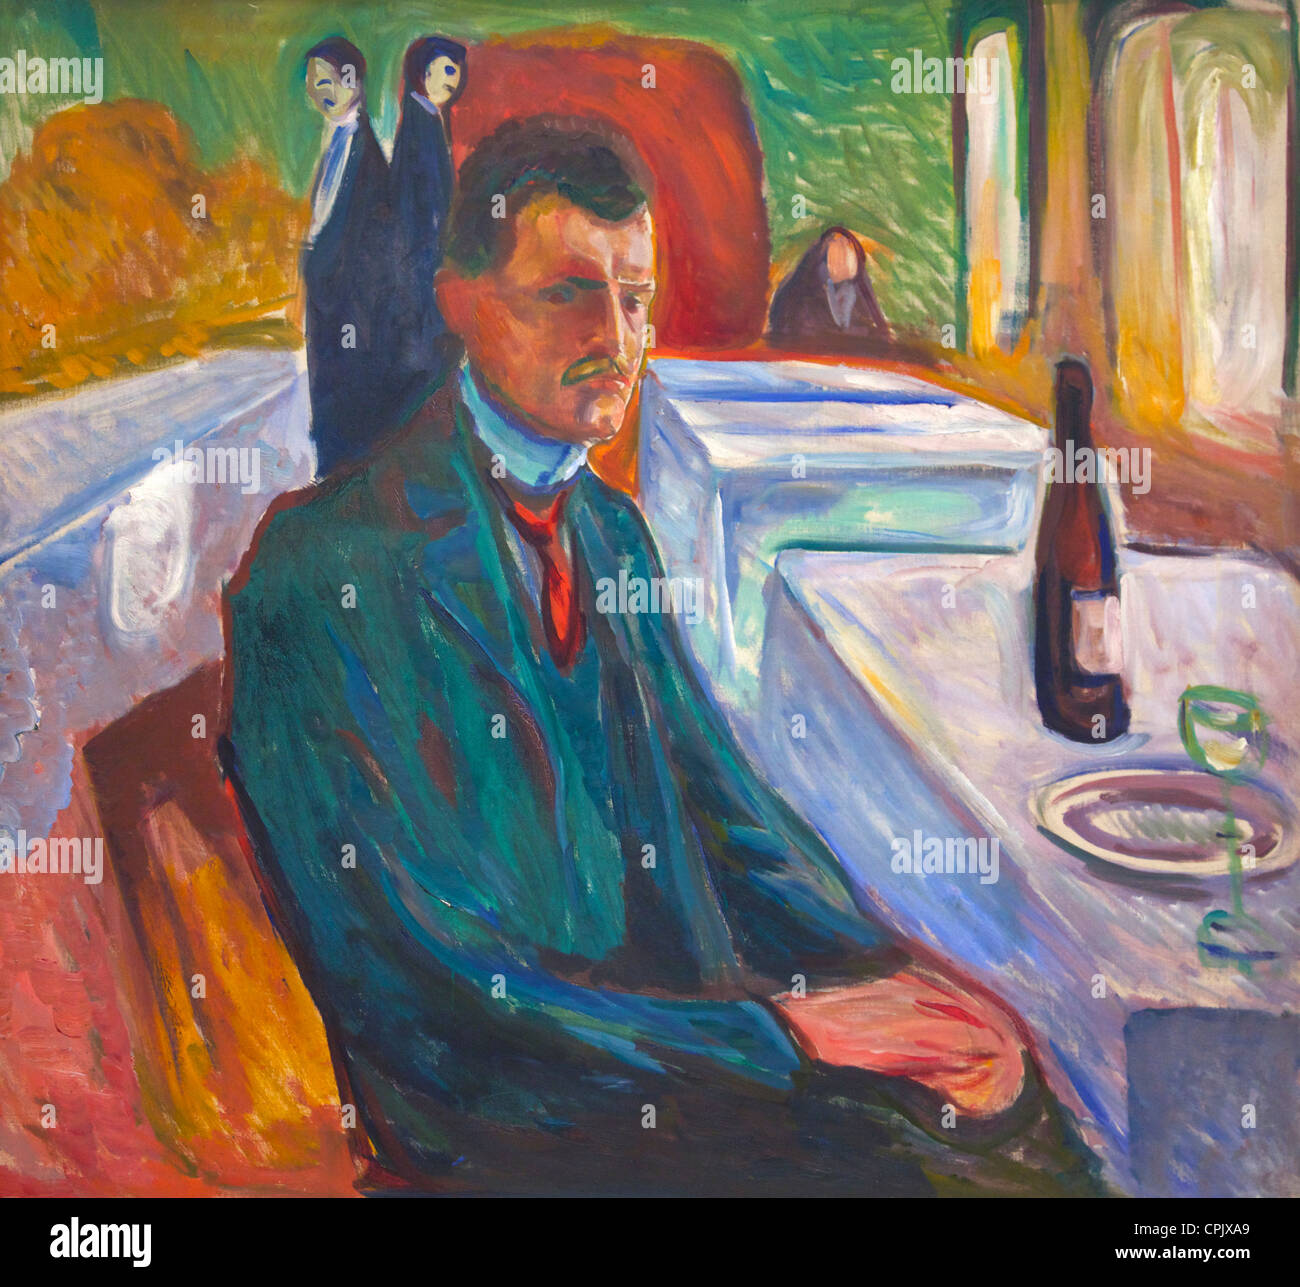 Self-portrait with Bottle of Wine, 1906, by Edvard Munch, in the Munch Museum and Art Gallery, Munch-Museet, Oslo, Norway, Stock Photo